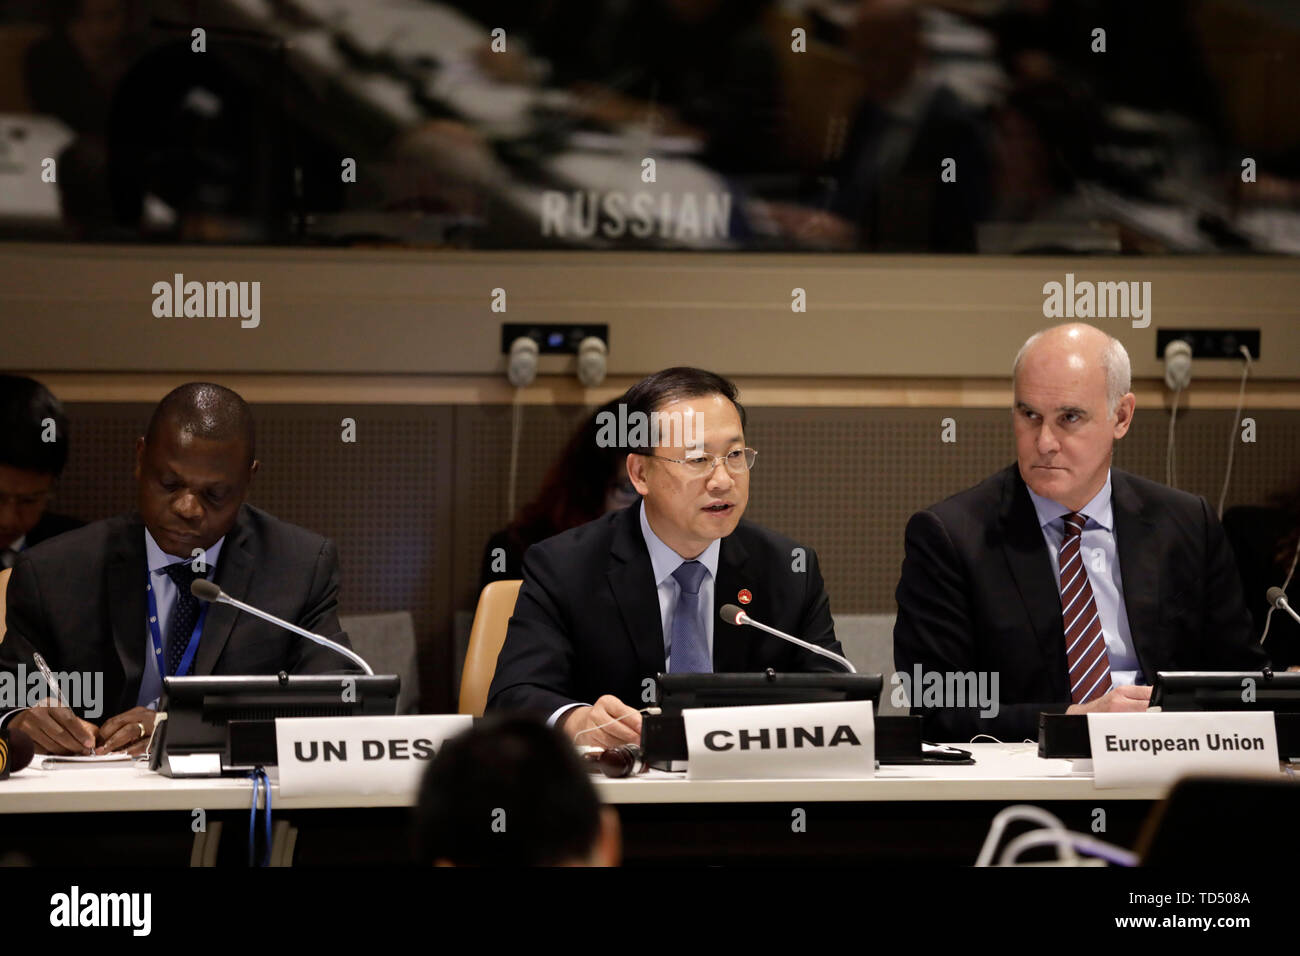 United Nations. 11th June, 2019. China's permanent representative to the United Nations Ma Zhaoxu (C) speaks during a side event of the 12th Session of the Conference of States Parties to the Convention on the Rights of Persons with Disabilities at the UN headquarters in New York, June 11, 2019. The Chinese envoy on Tuesday highlighted the importance of poverty eradication for persons with disabilities. Credit: Li Muzi/Xinhua/Alamy Live News Stock Photo